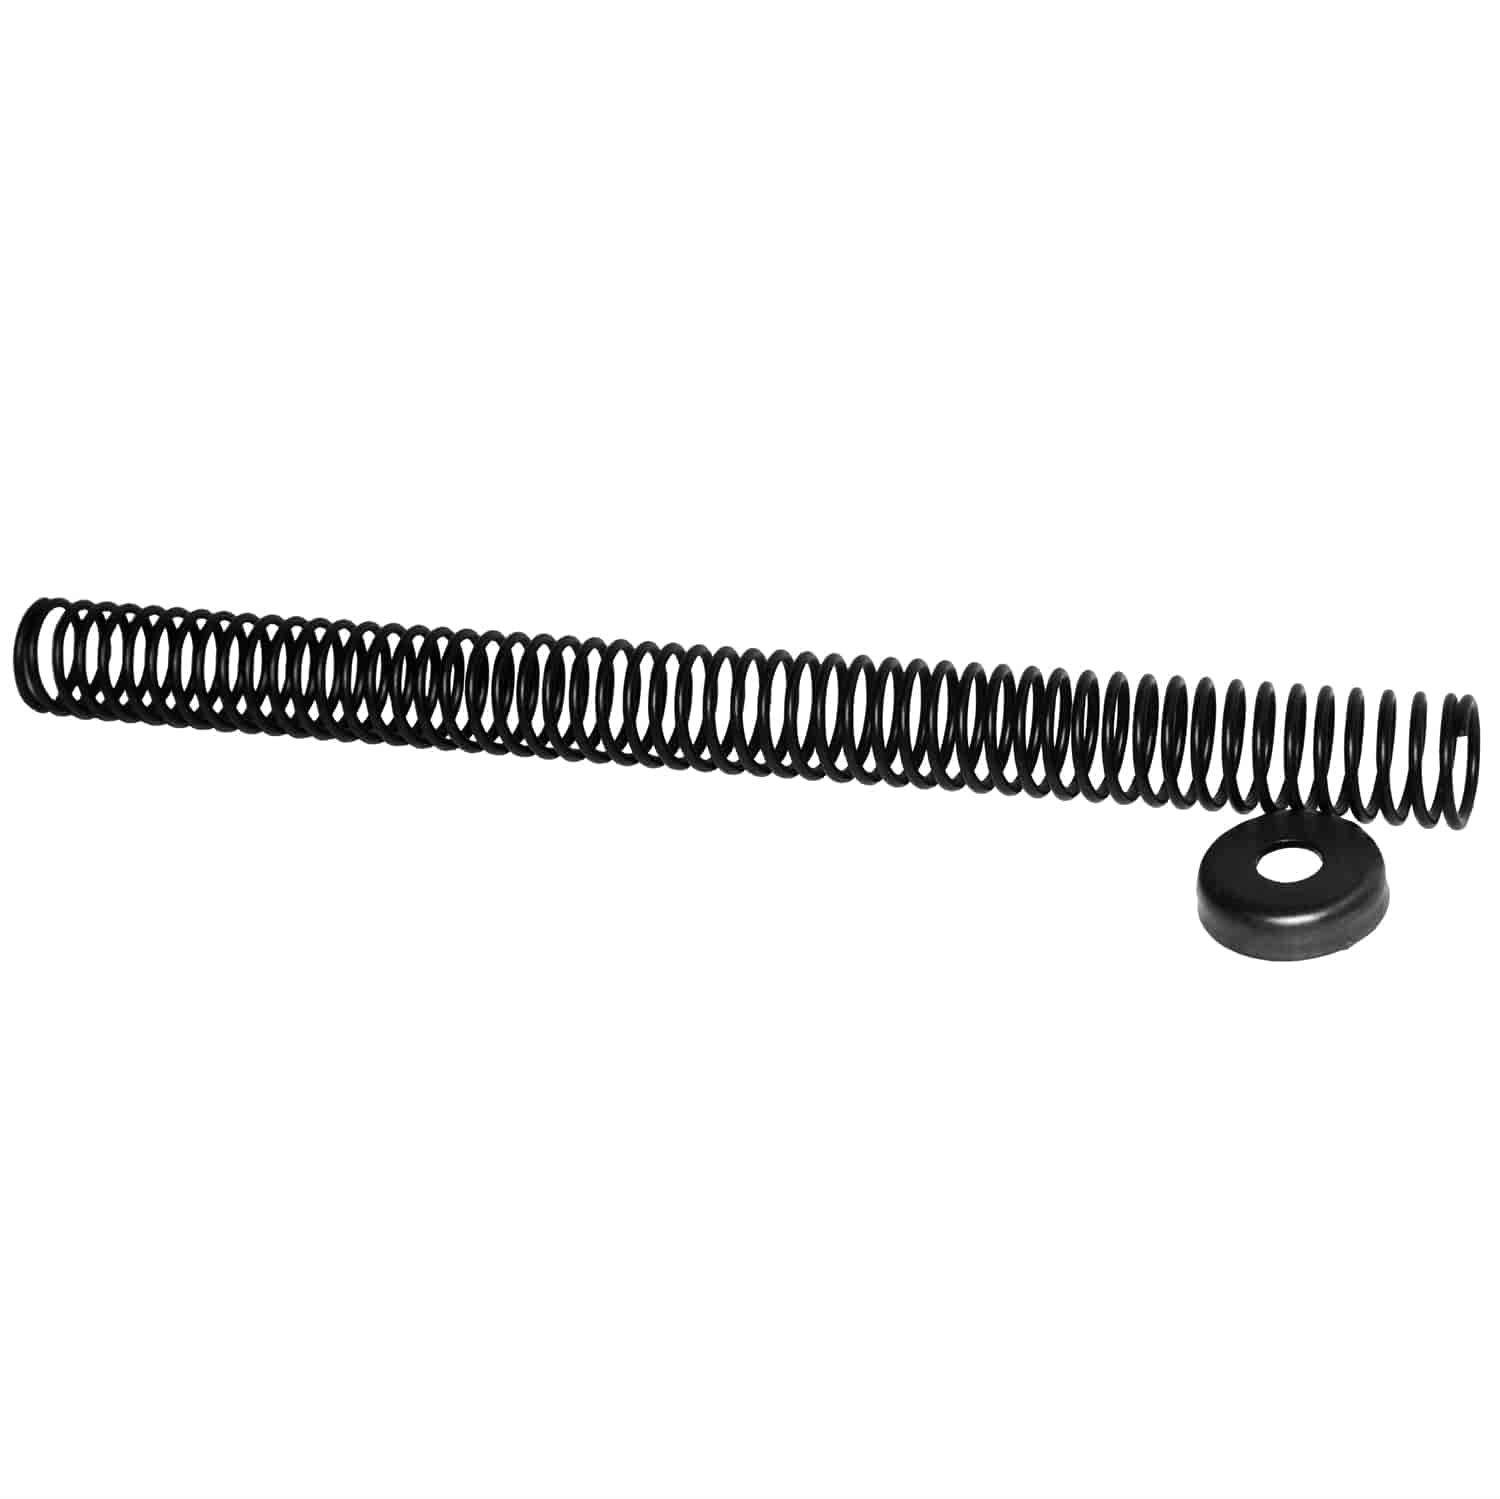 Front Brake Cable Spring & Cap 1969-1970 Ford Mustang